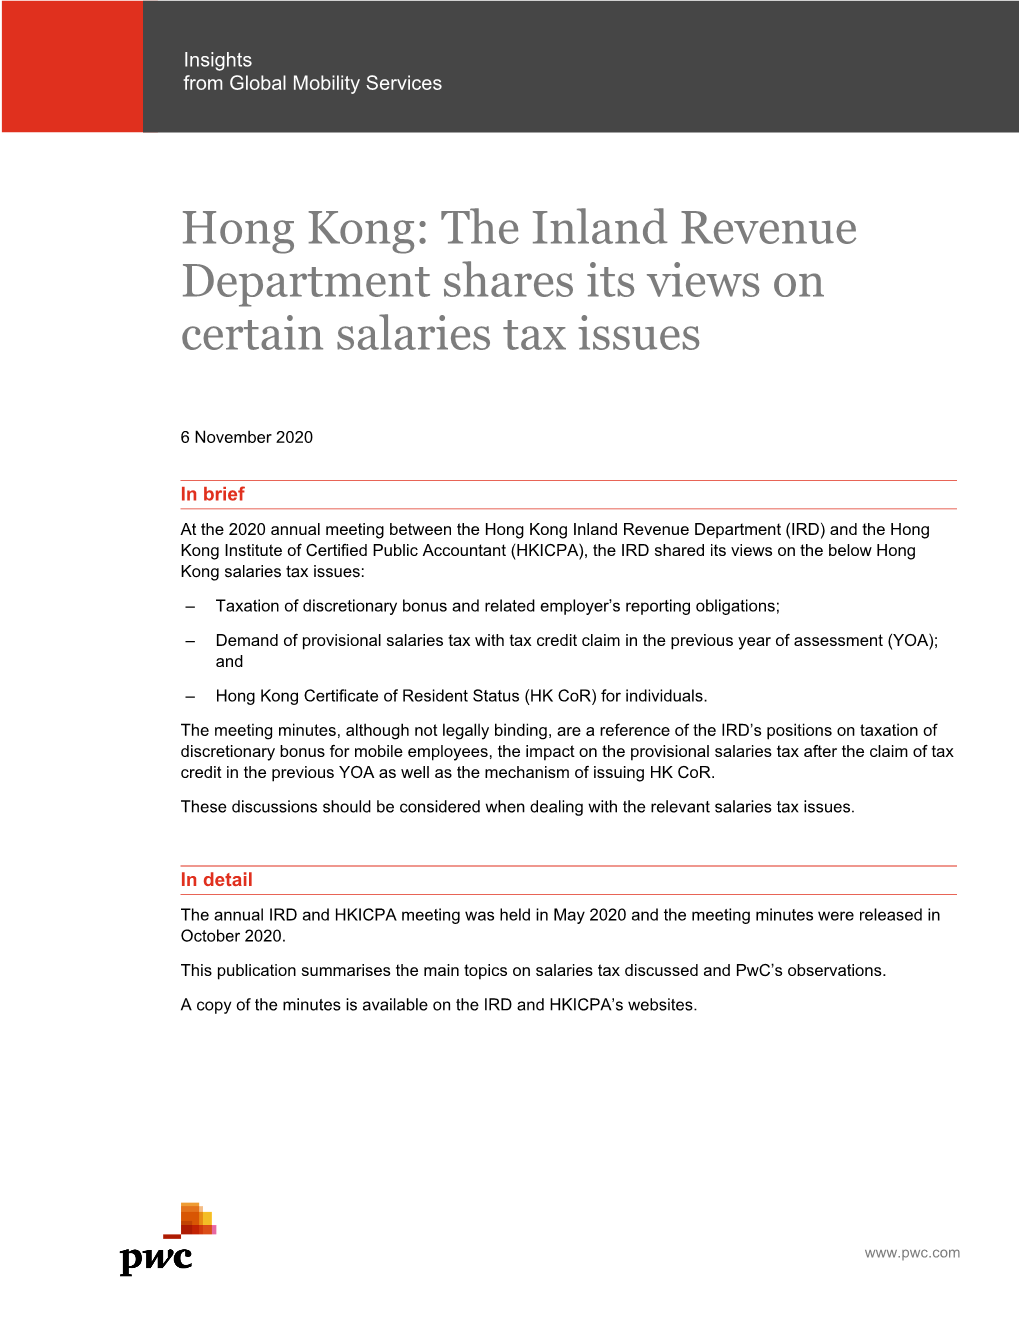 Hong Kong: the Inland Revenue Department Shares Its Views on Certain Salaries Tax Issues